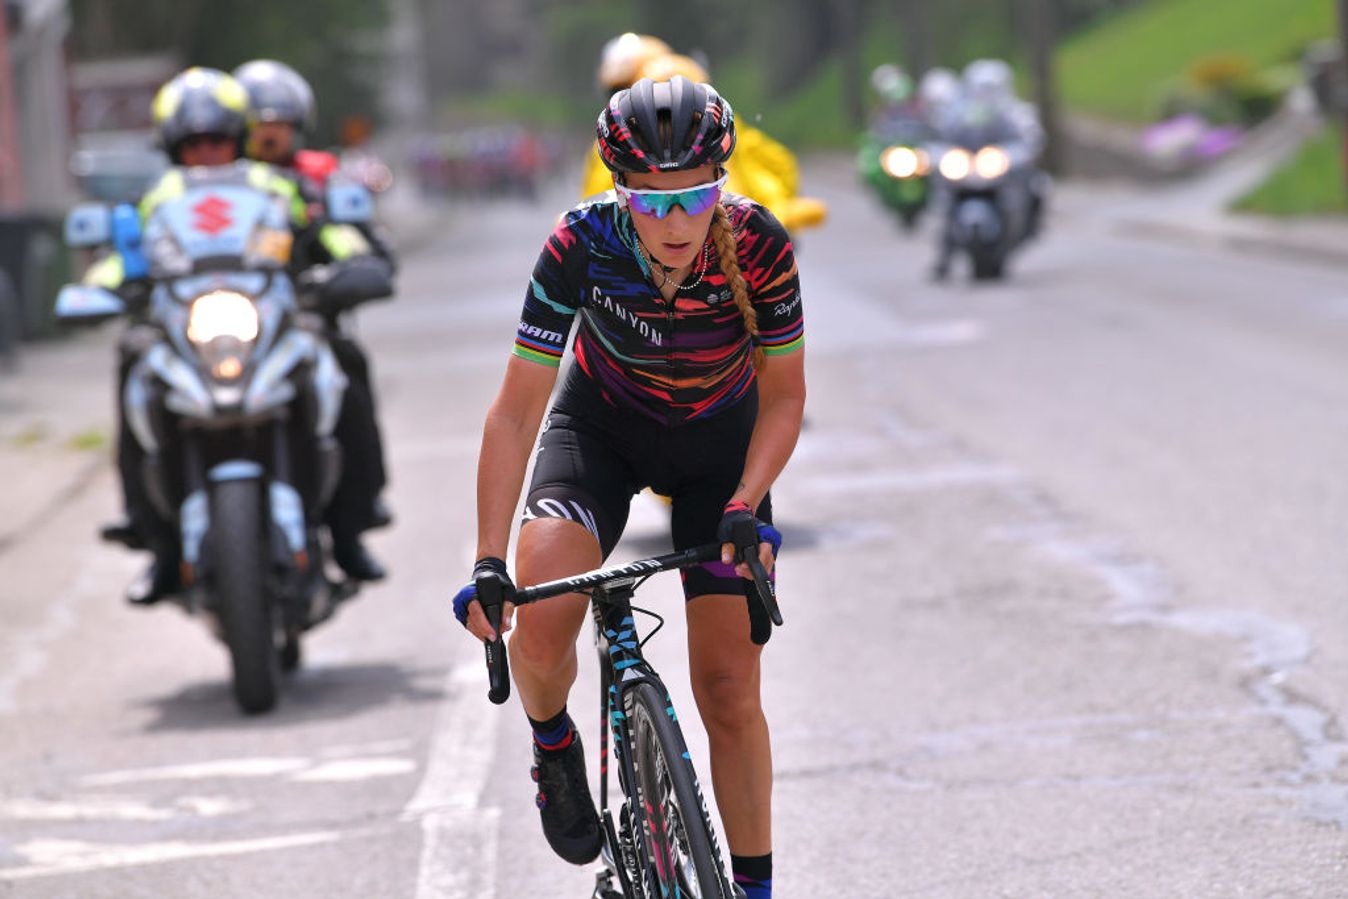 Pauline Ferrand-Prévot in 2018 during her previous stint at Canyon-SRAM